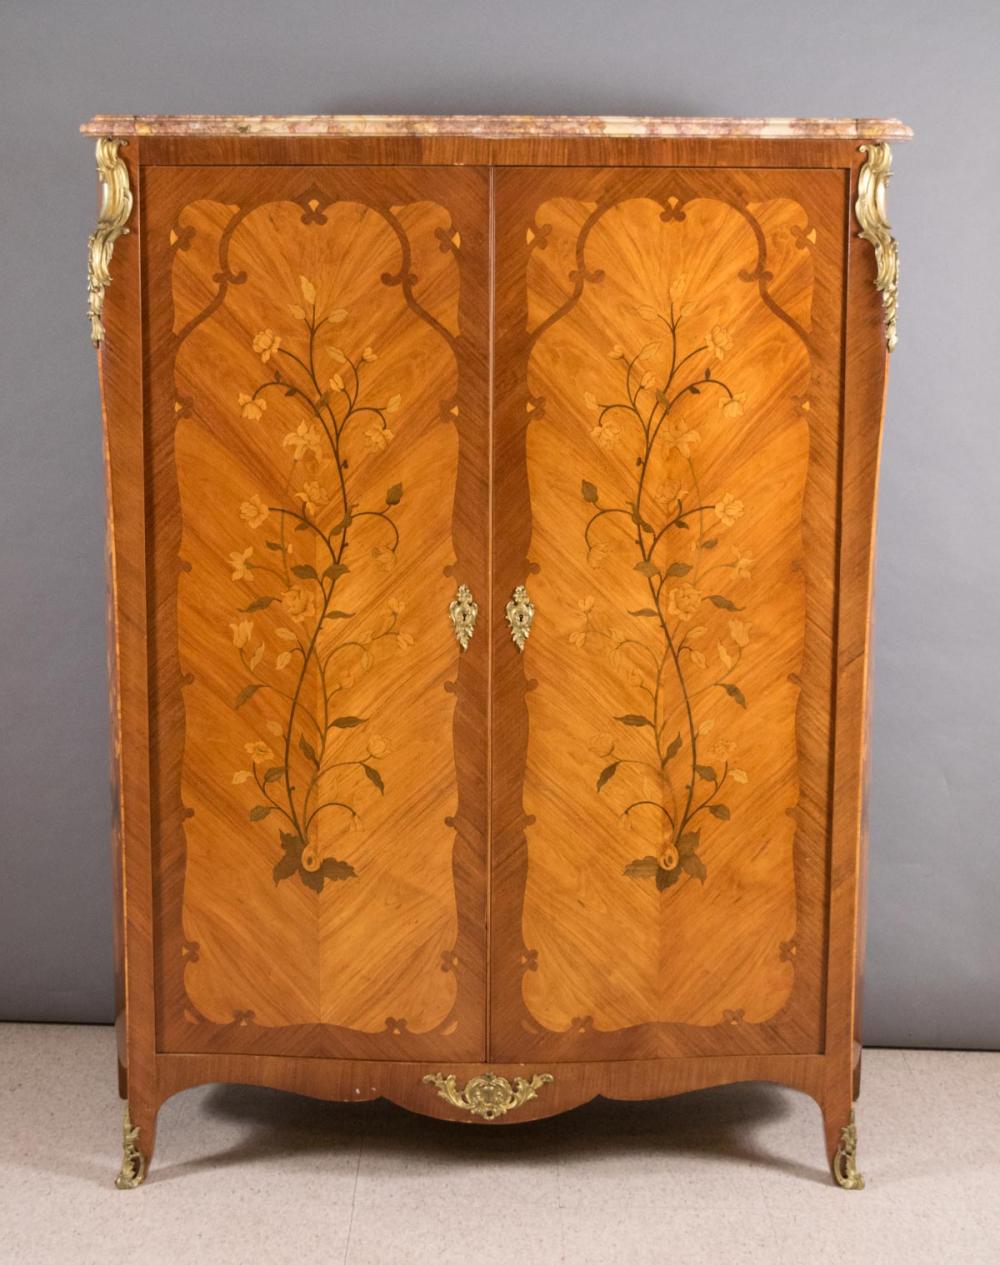 LOUIS XV STYLE MARBLE-TOP MARQUETRY